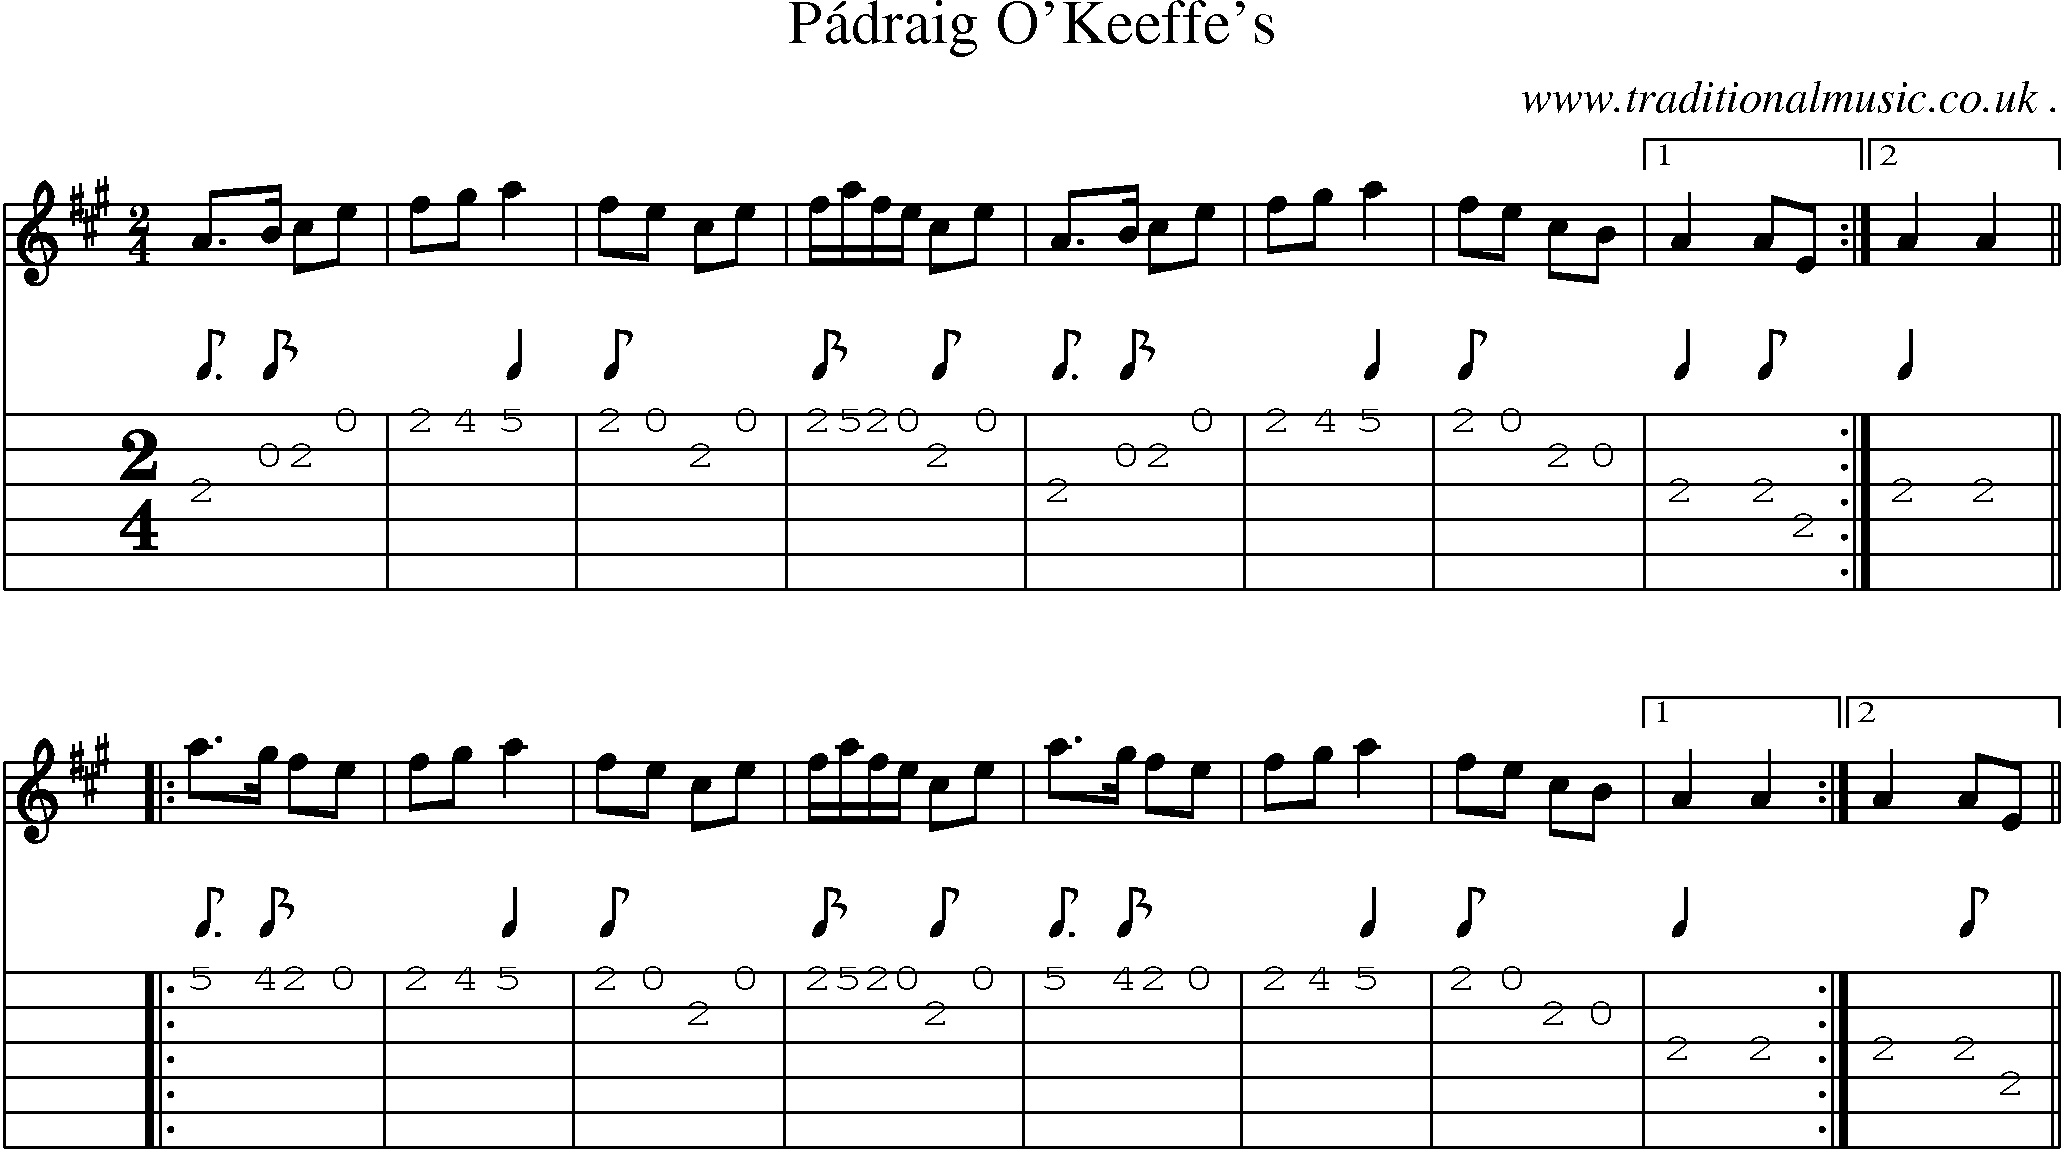 Sheet-Music and Guitar Tabs for Padraig Okeeffe